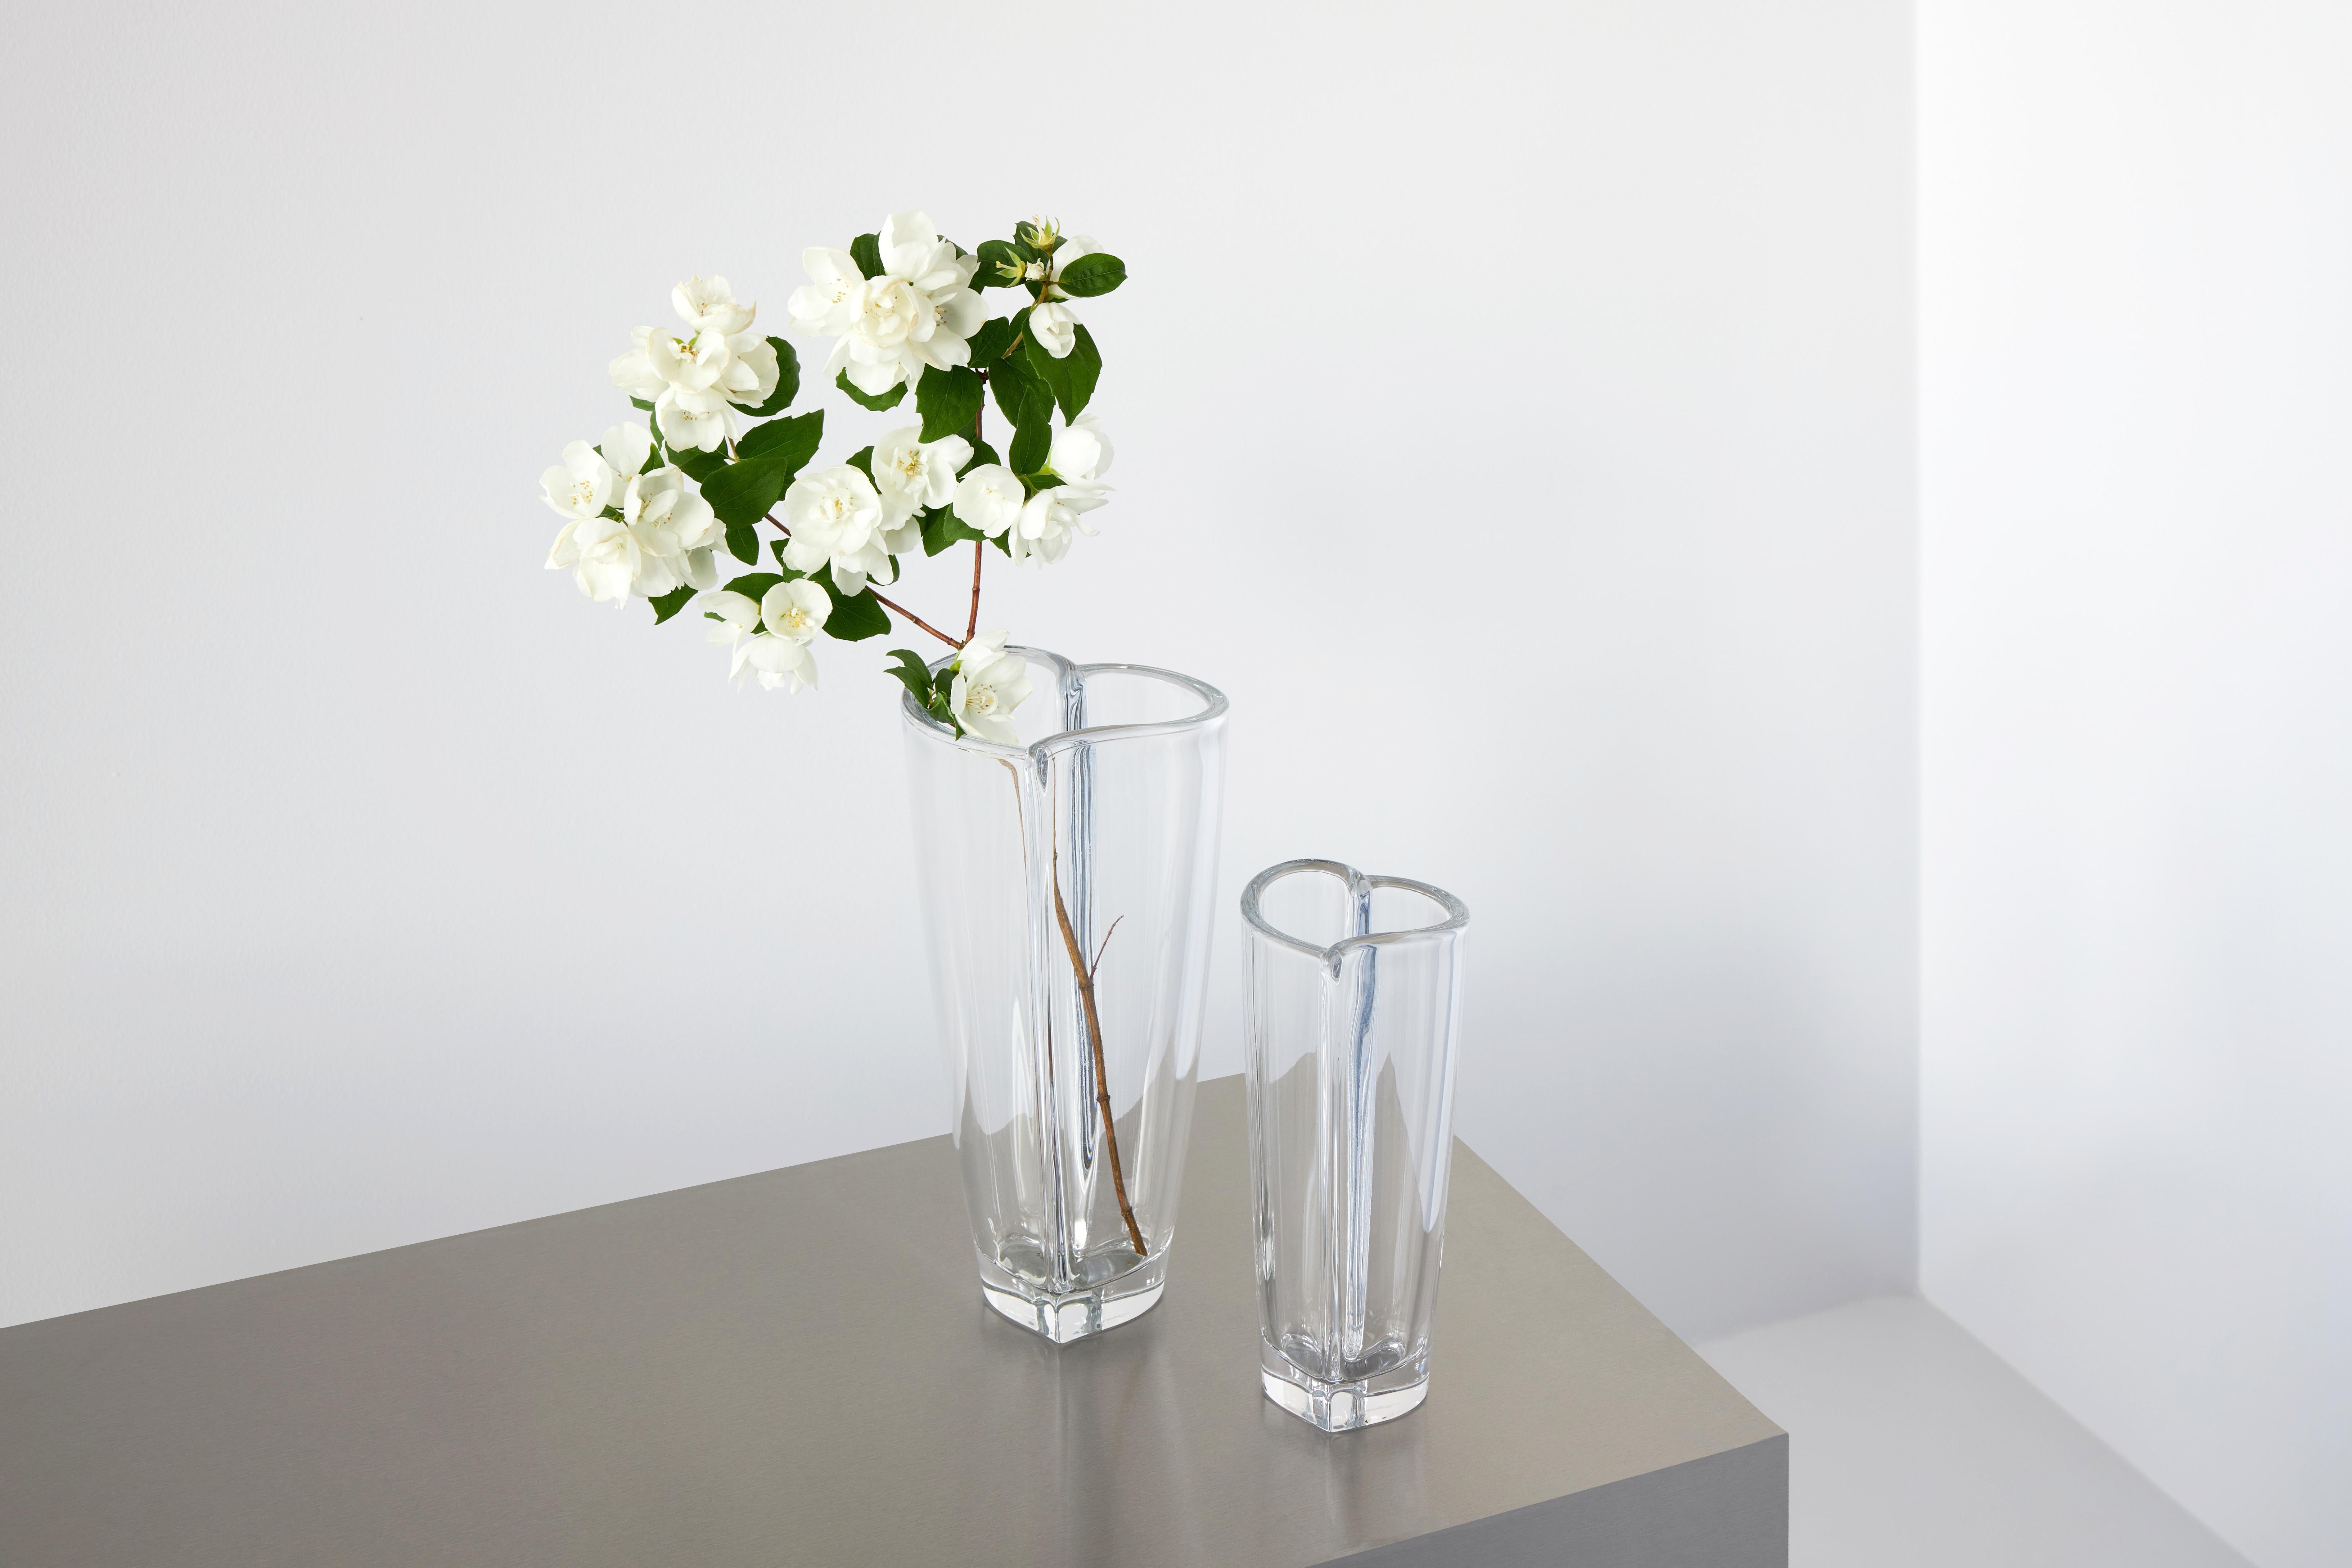 The Heart Vase from Orrefors is shaped like a heart, with rounded edges giving it a delicate look. It represents affection and love, the perfect gift for someone you care about. Heart Bud Vase, which is both decorative and functional, is suitable